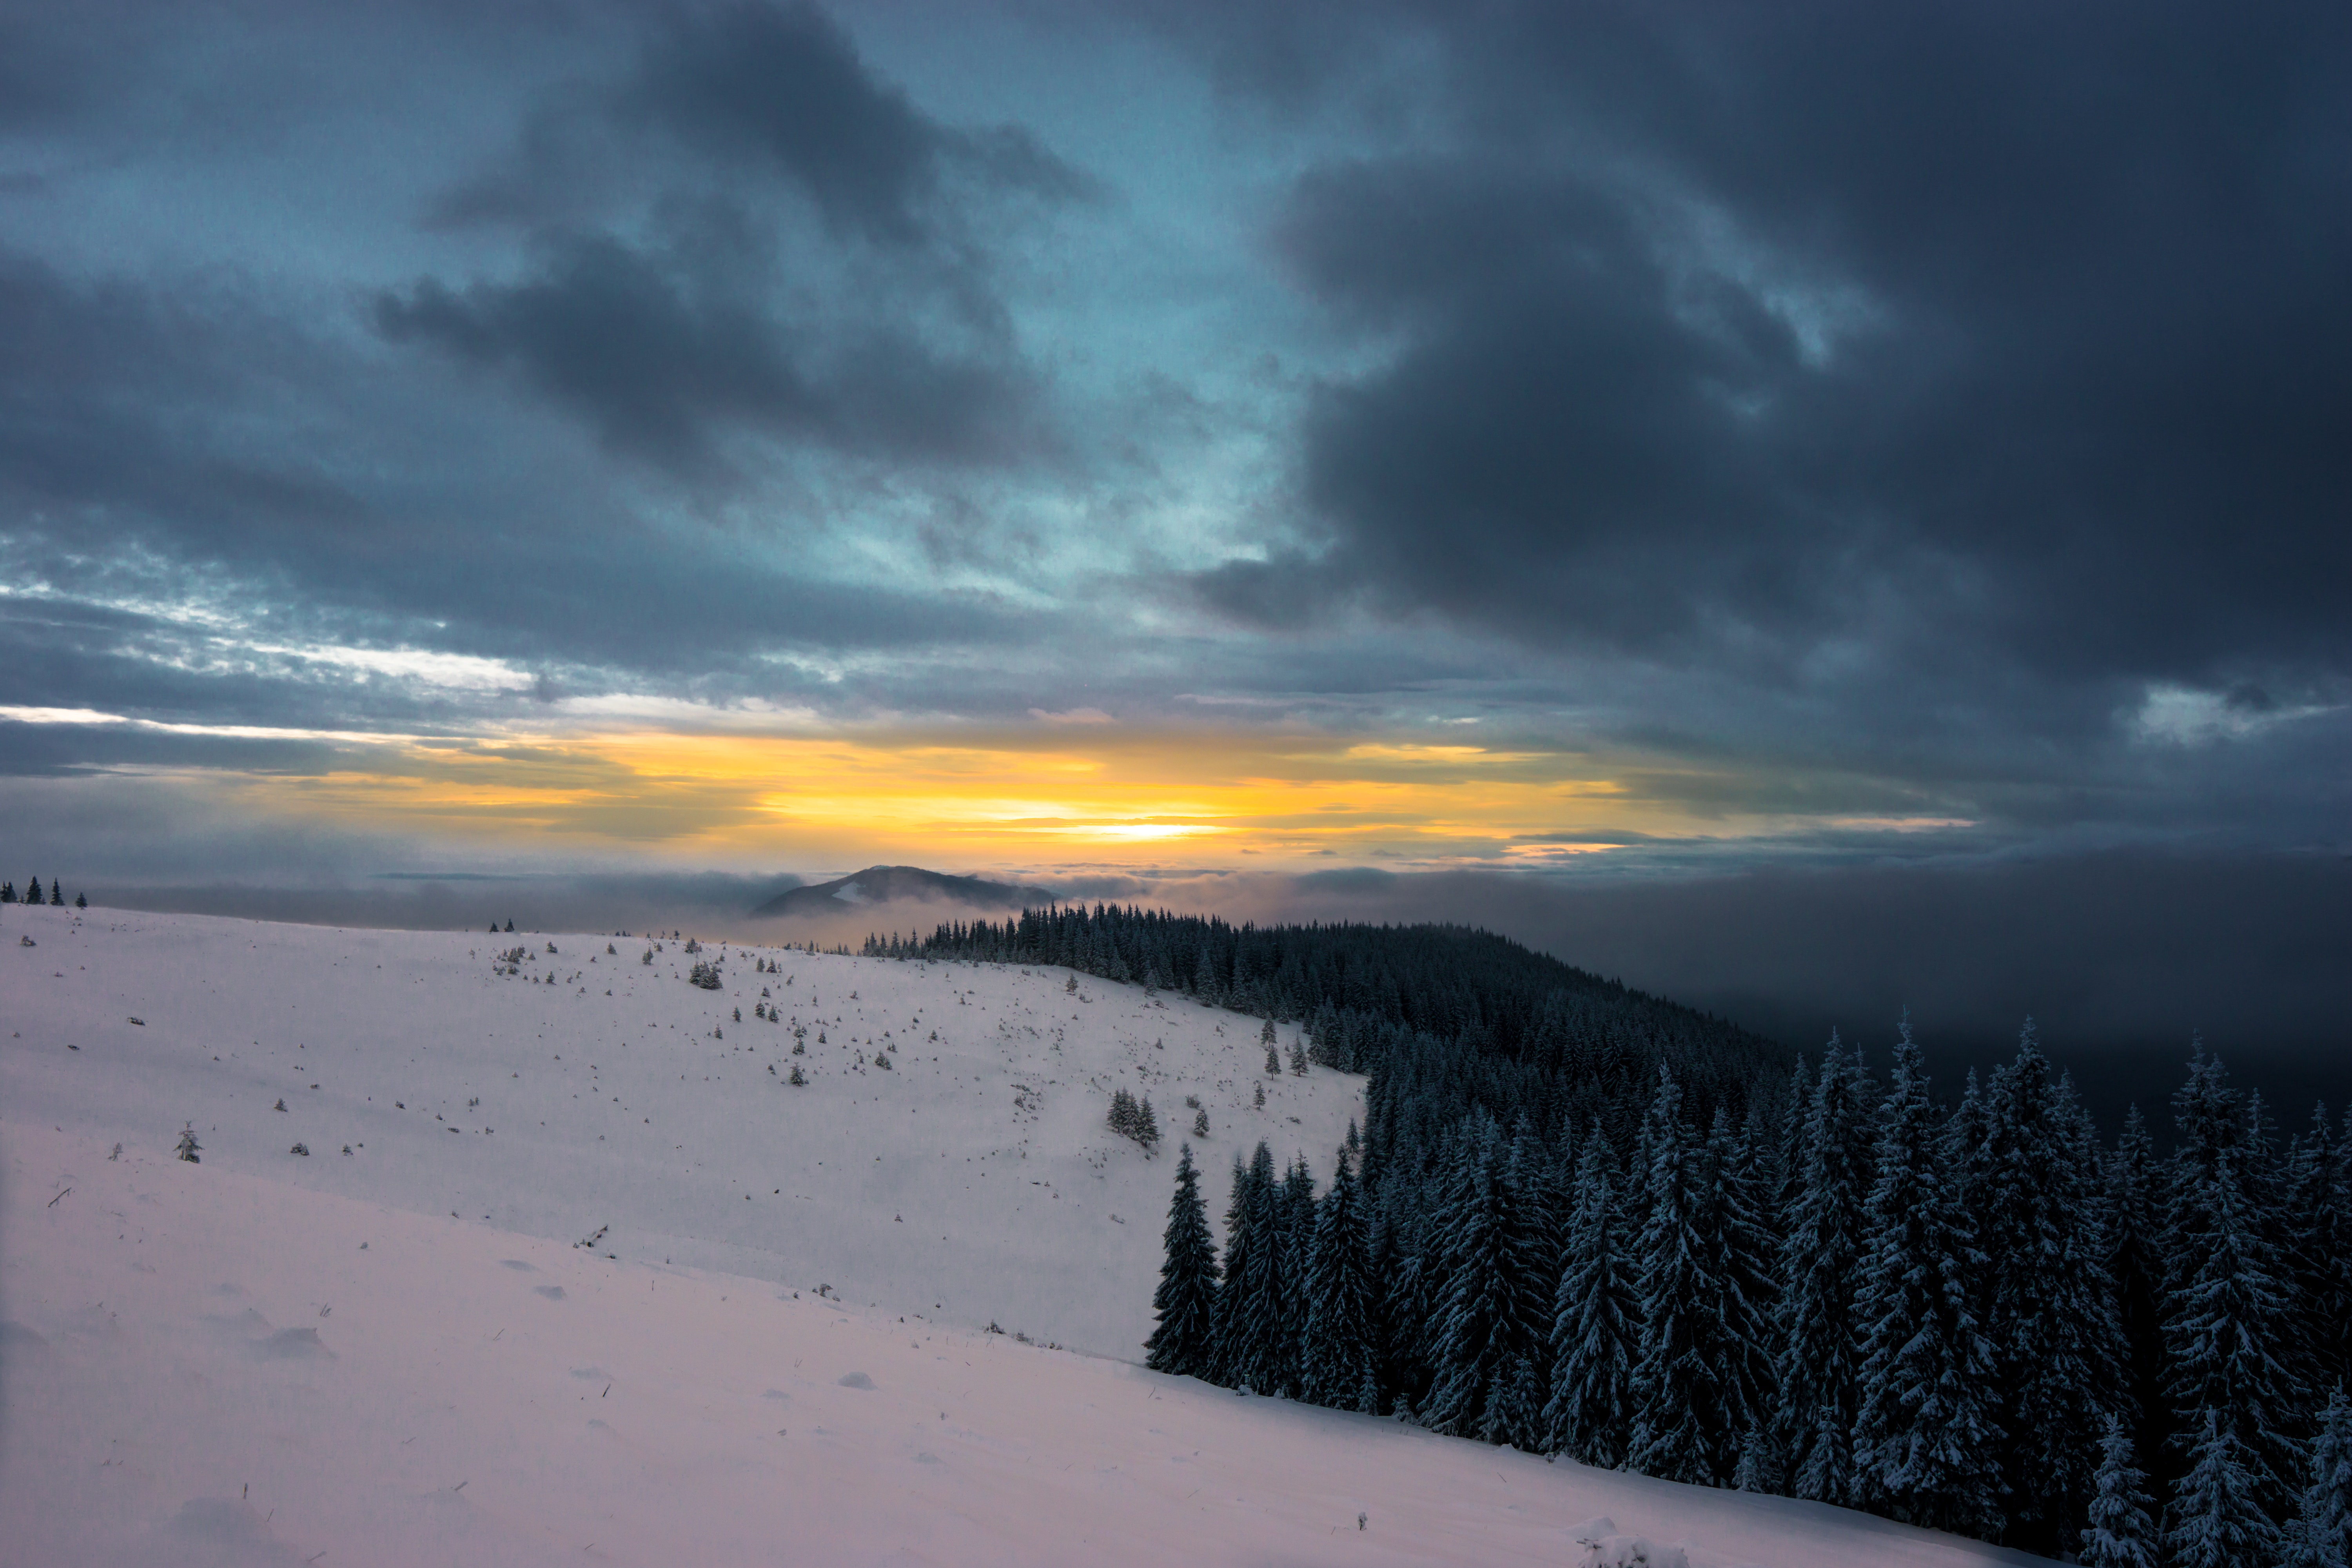 snow, nature, mountains, winter, sunset, sky, clouds, forest, snow covered, snowbound